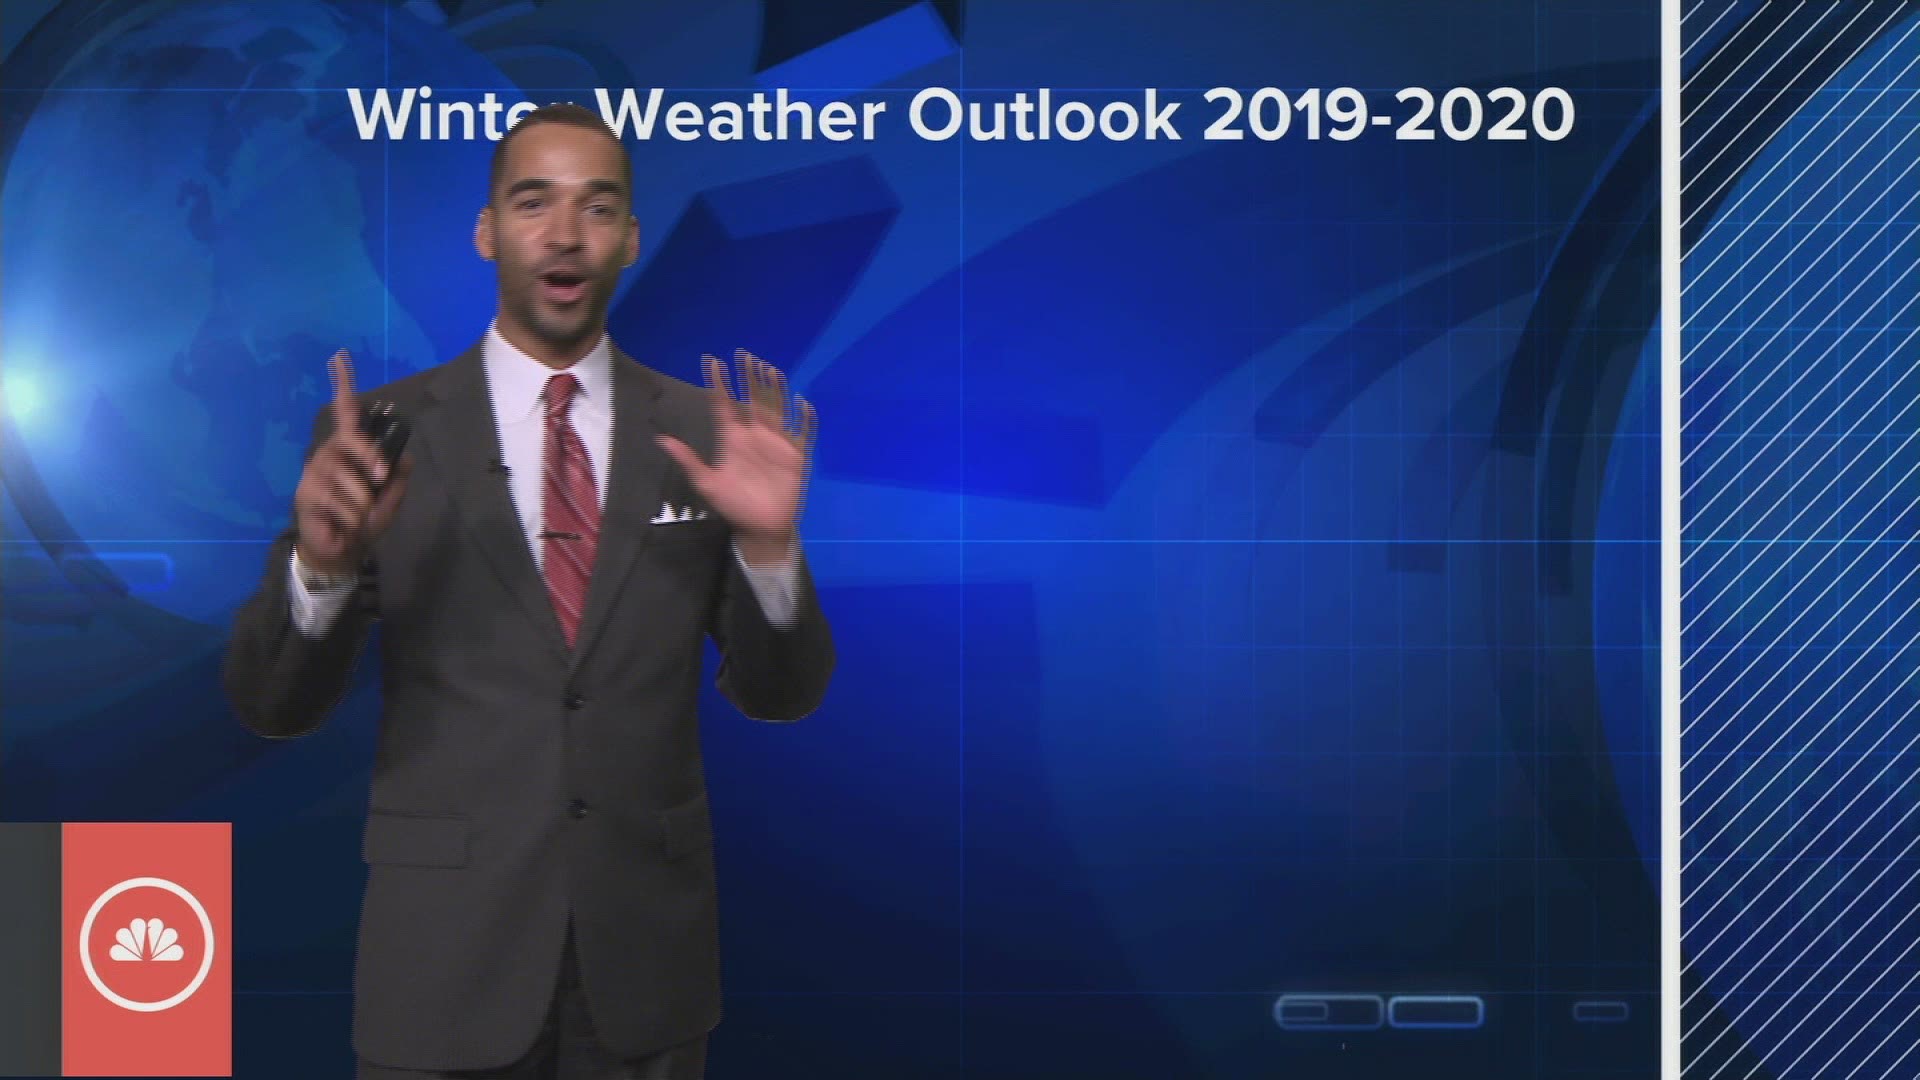 Ready or not, here it comes. Meteorologist Michael Estime tells you what to expect across Northeast Ohio this winter.